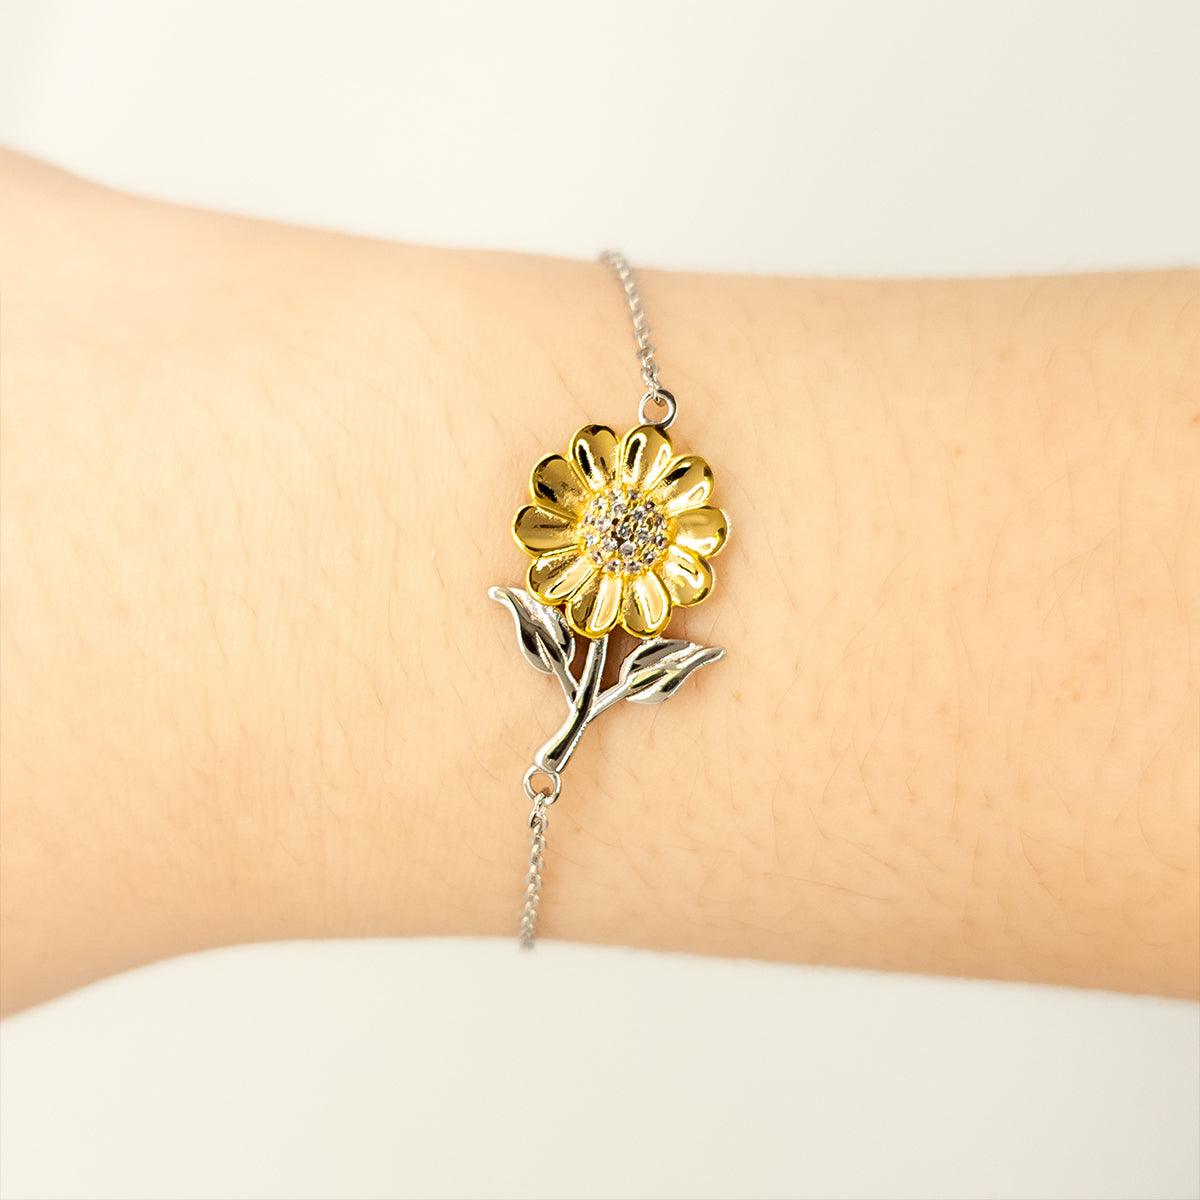 Groundskeeper Sunflower Bracelet - Thanks for being who you are - Birthday Christmas Jewelry Gifts Coworkers Colleague Boss - Mallard Moon Gift Shop